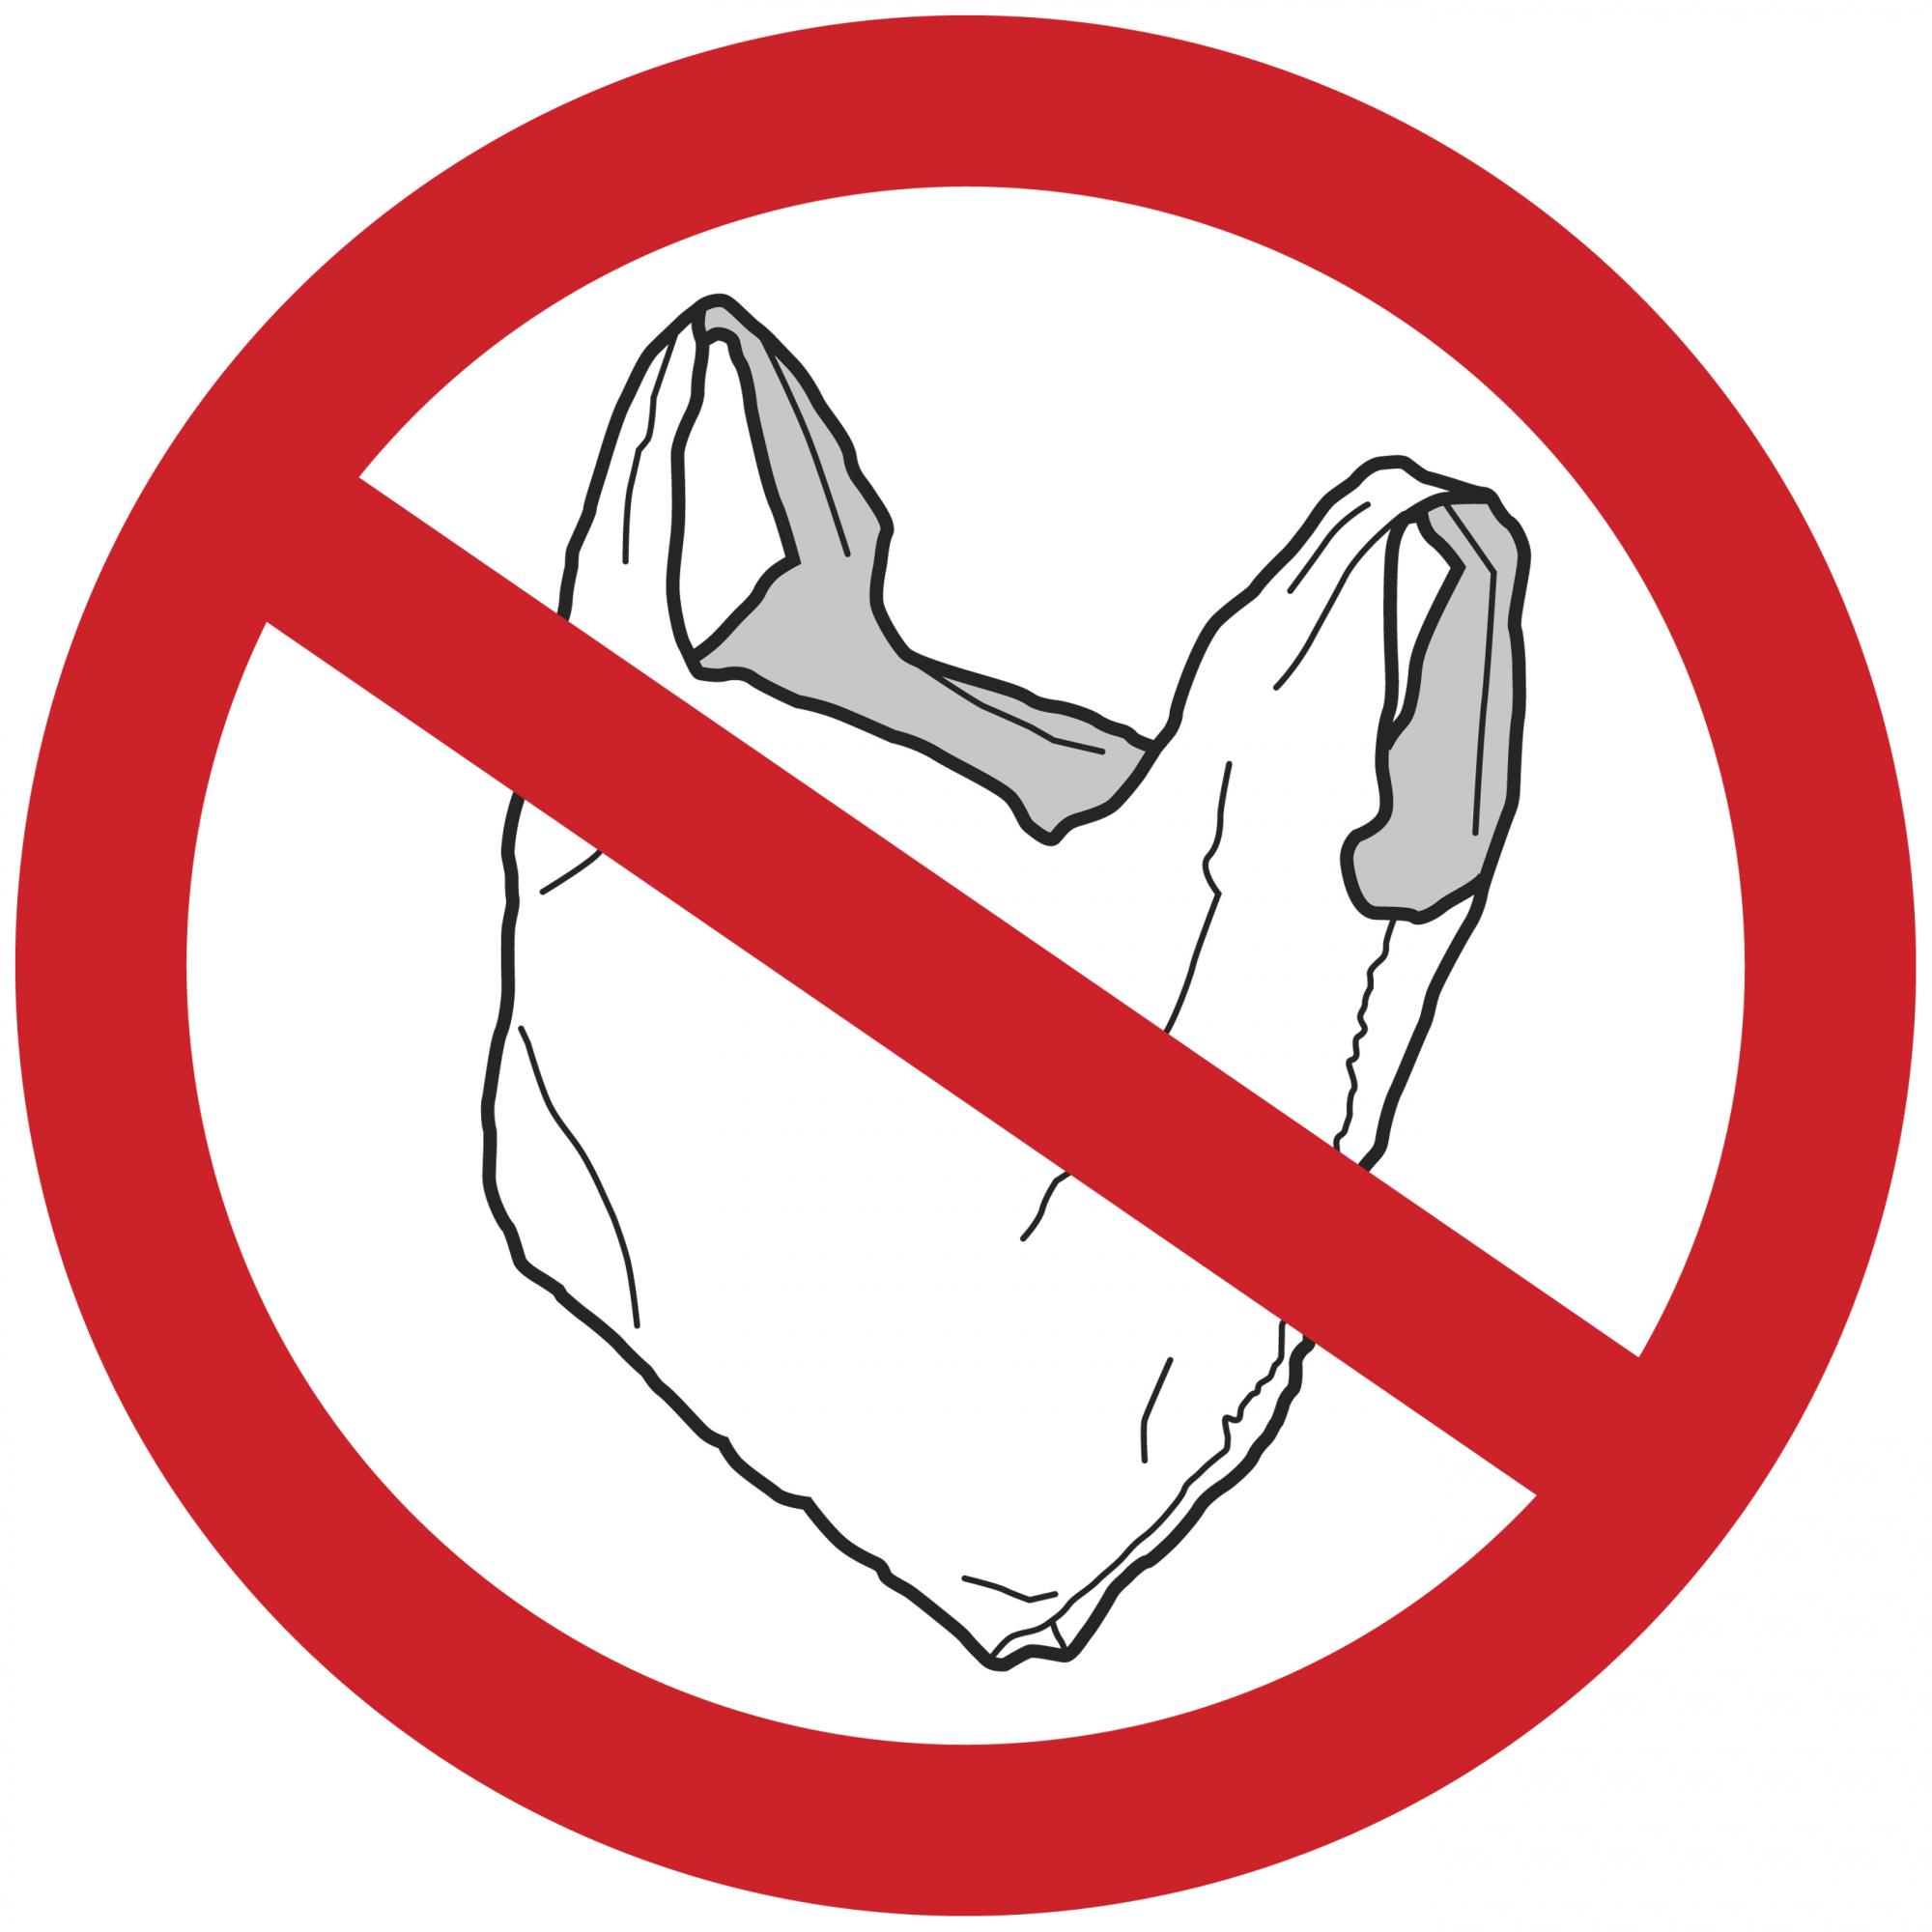 Plastic Bags Are Ruining Our Planet | Take Action @ GreaterGood.com